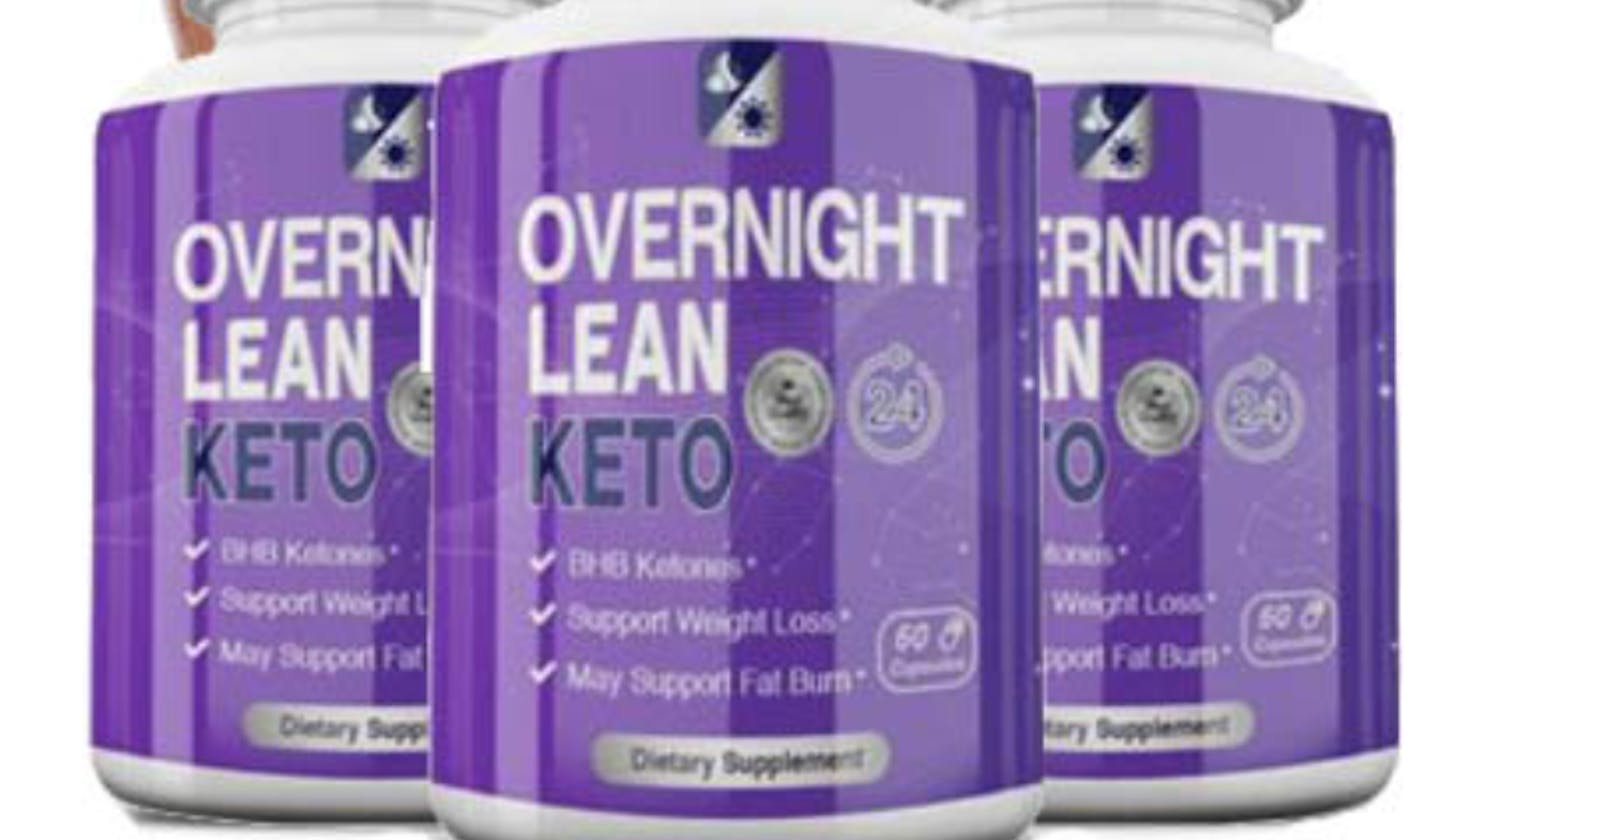 Overnight Lean Keto: Price, Safe & Effective To Use?